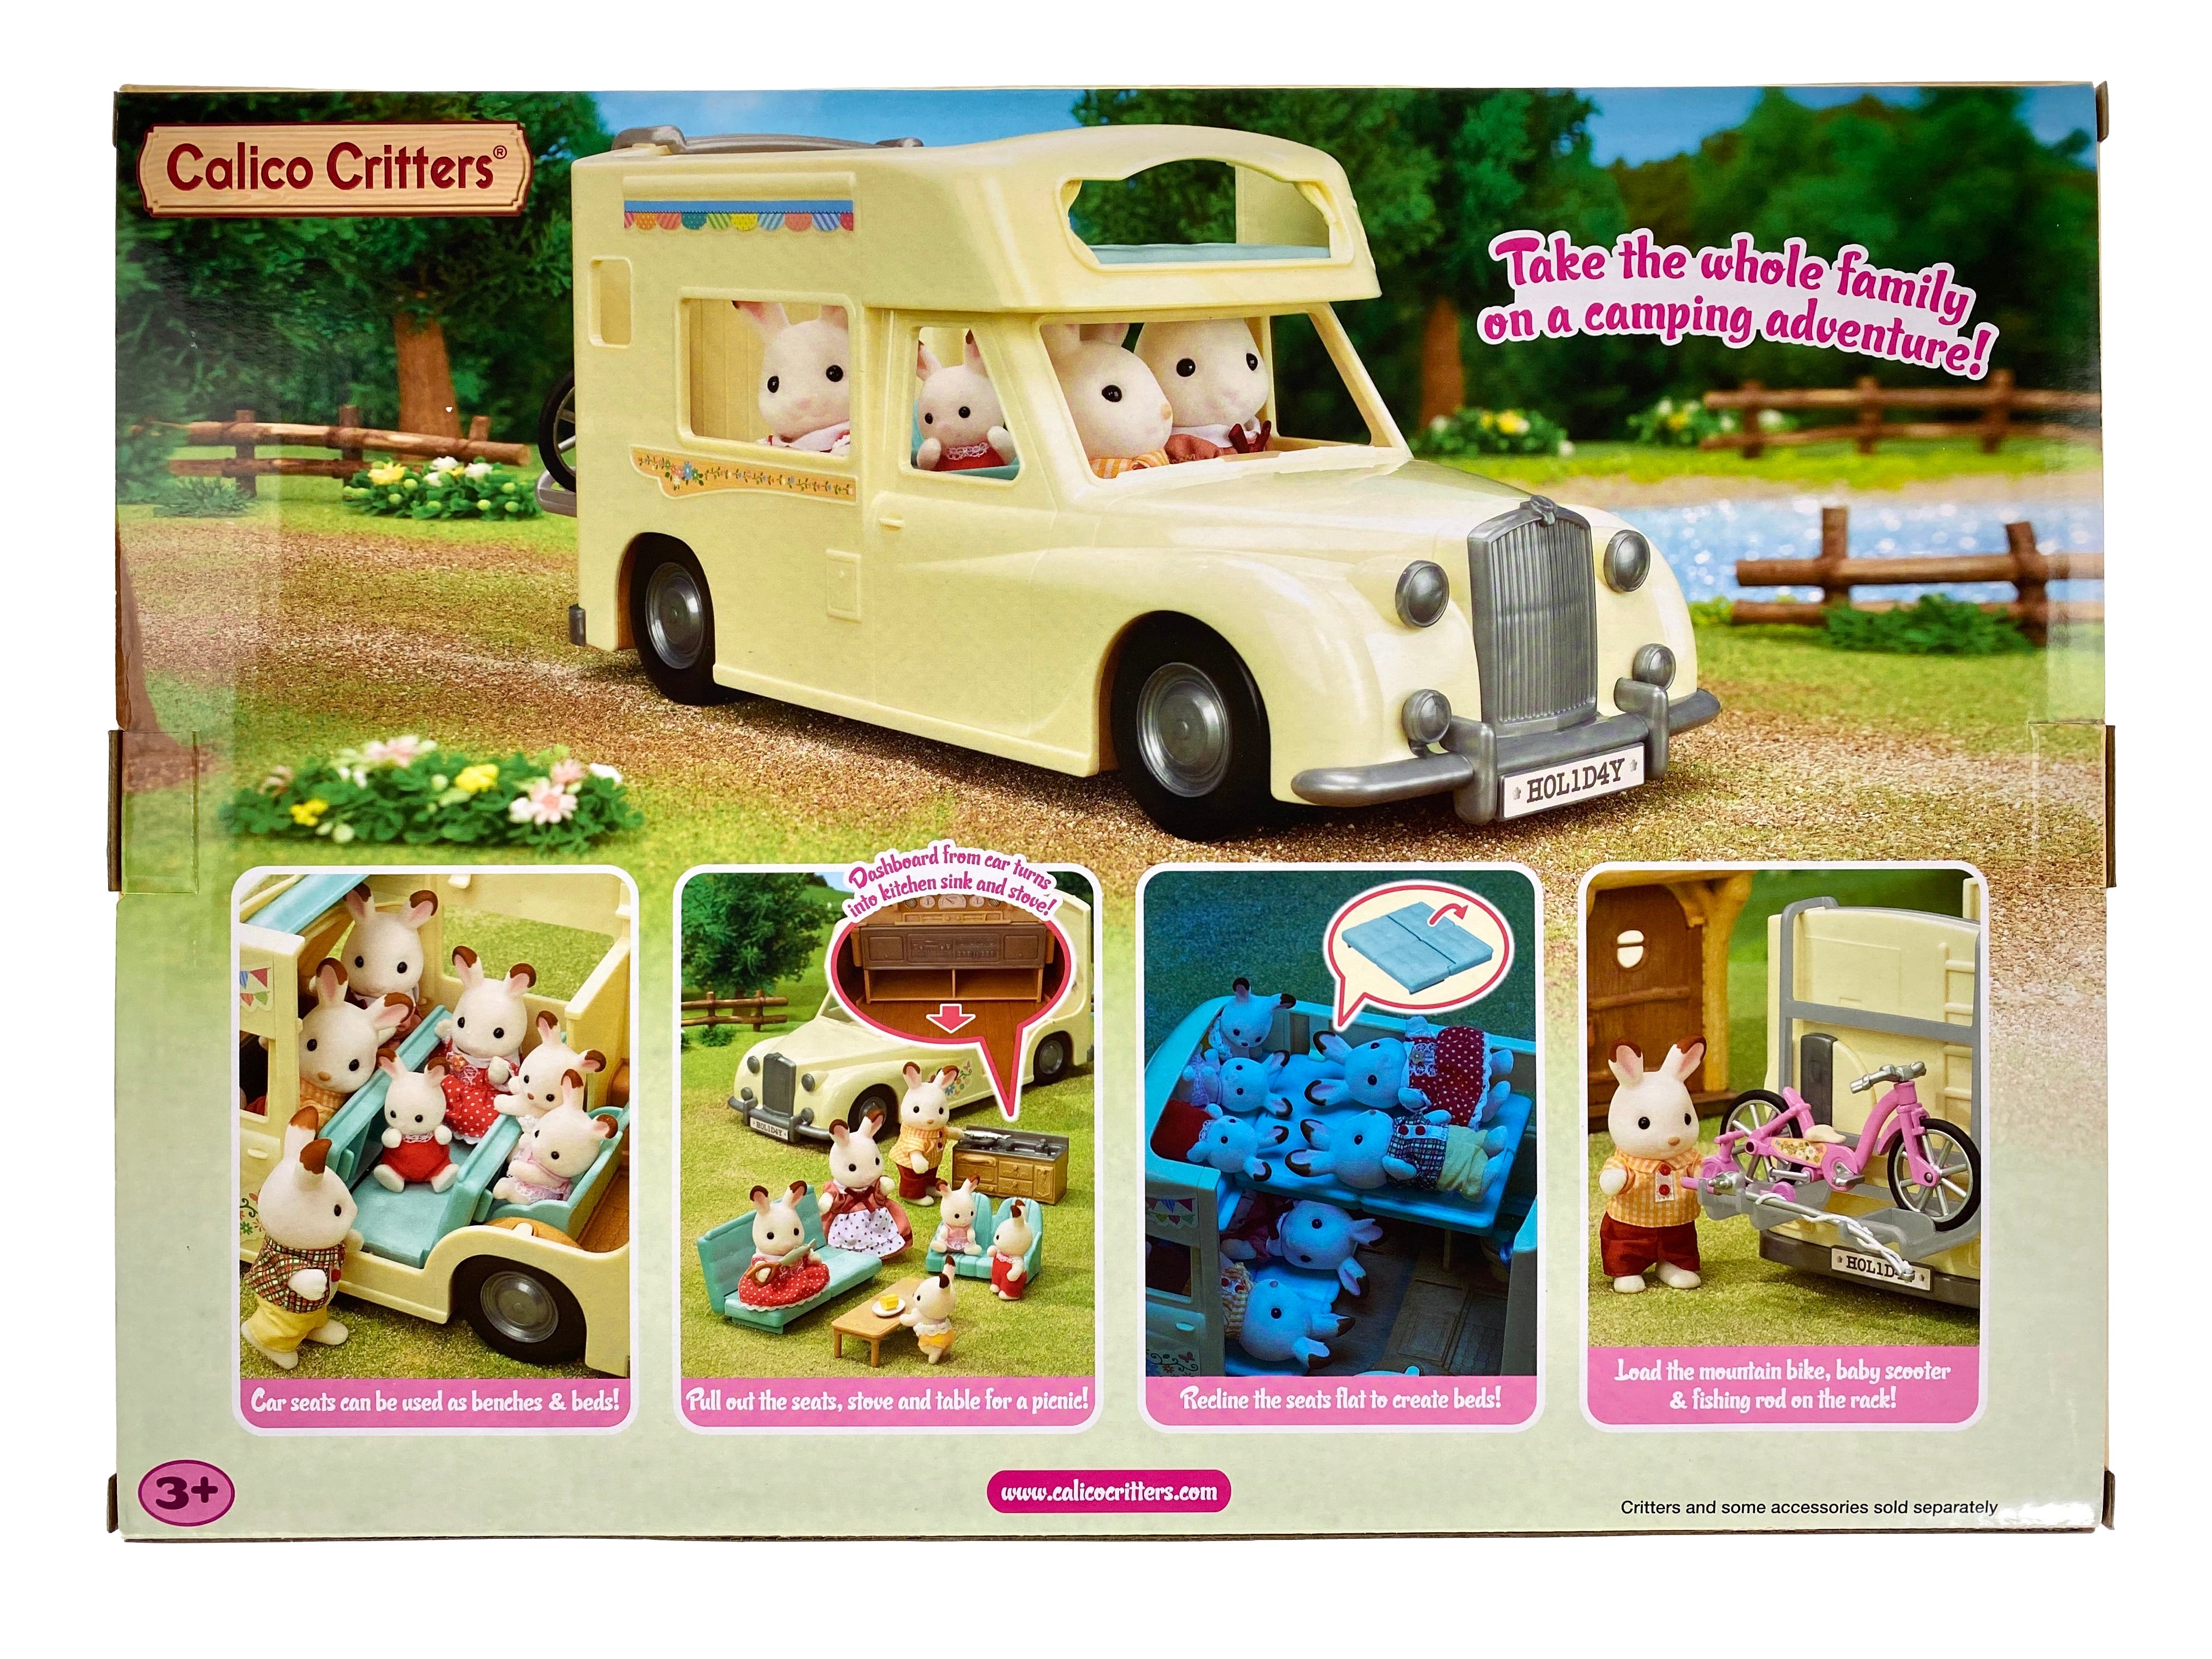 Calico Critters - Family Campervan    